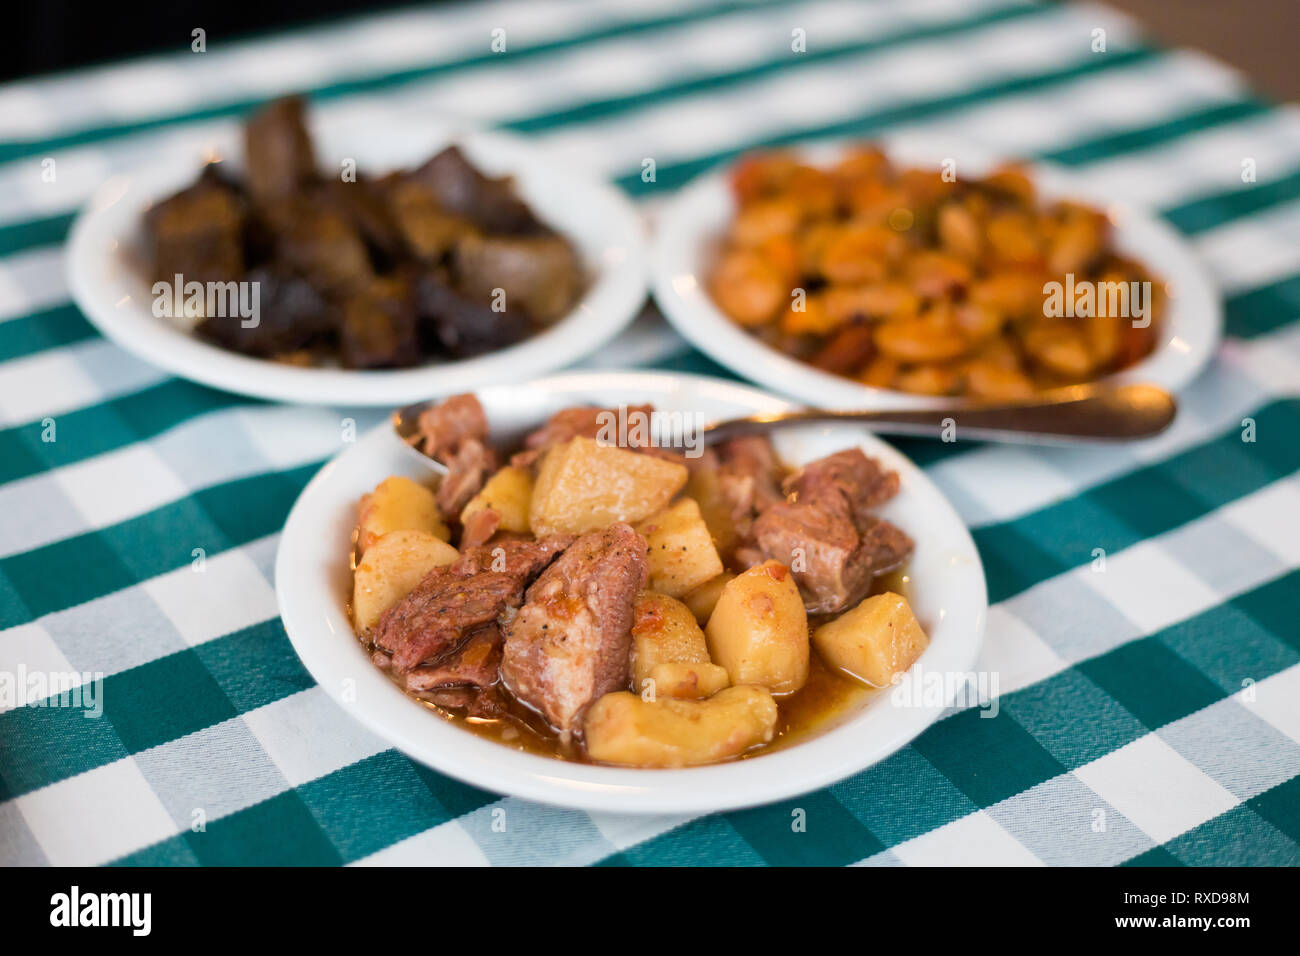 Food selection of bean, pork, liver and potato in local restaurant in Larnaca. Traditional cypriot meze food on Cyprus island. Stock Photo